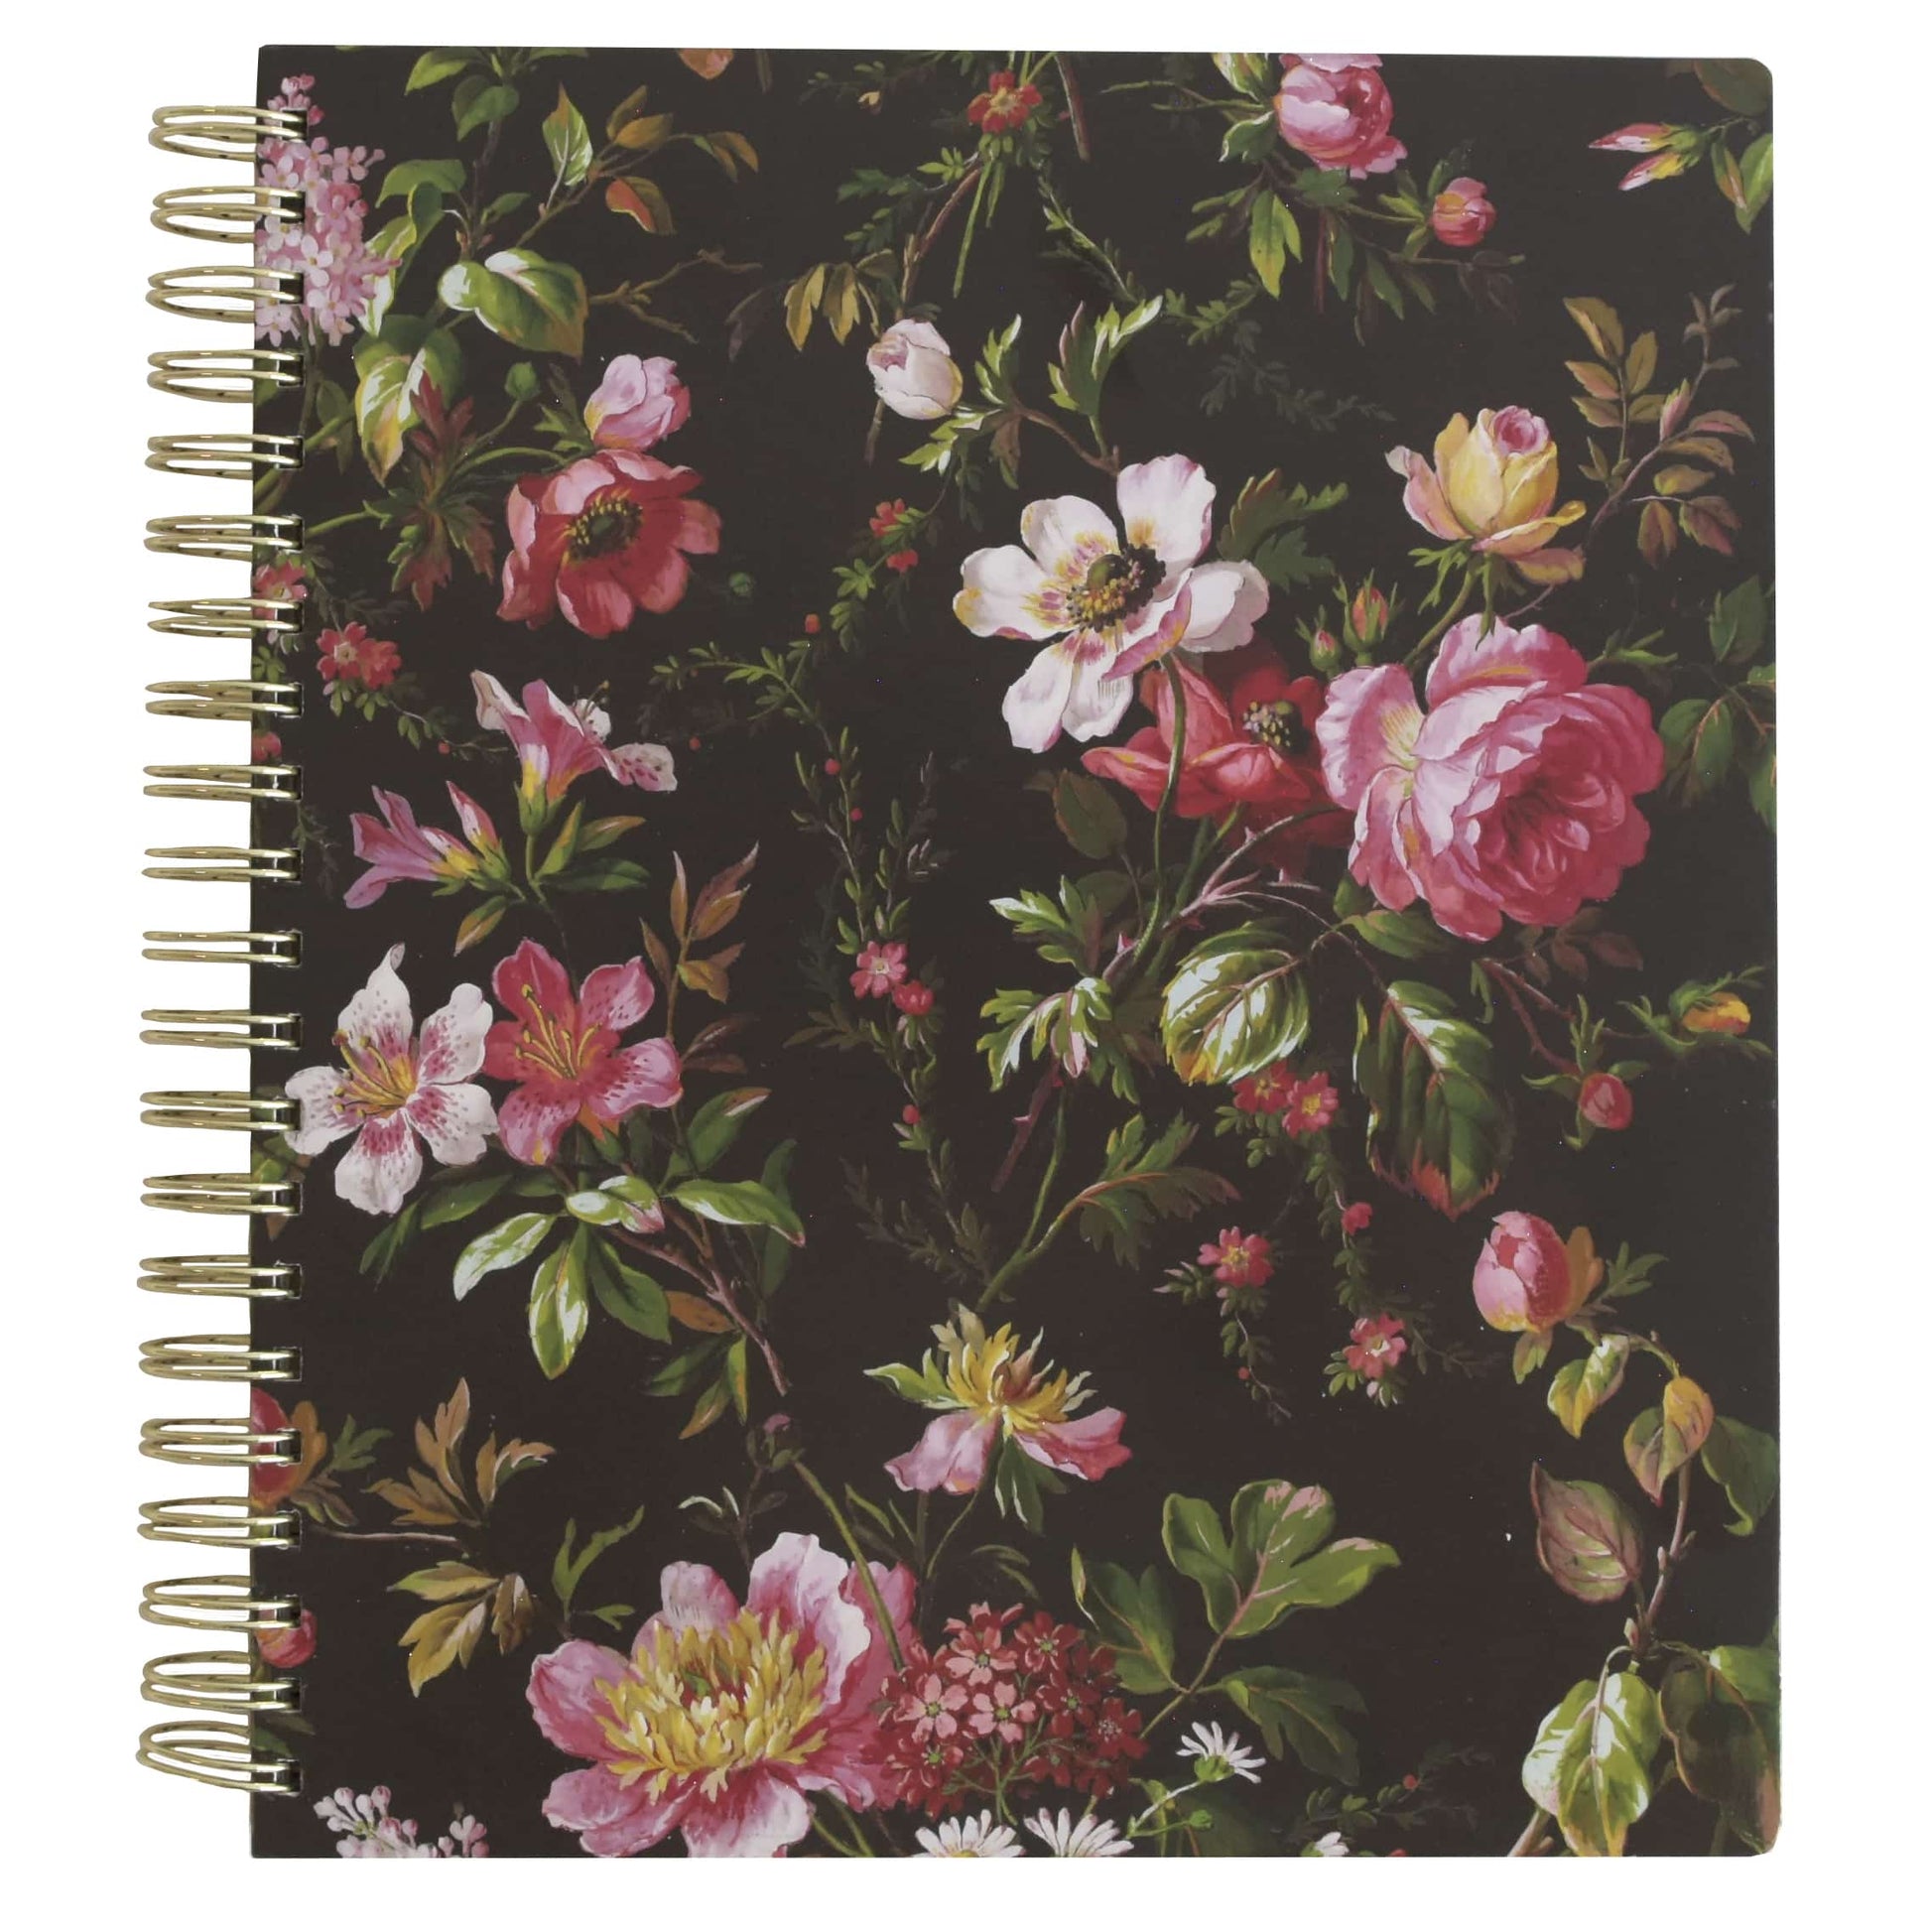 Unlined Spiral Notebook With Pen